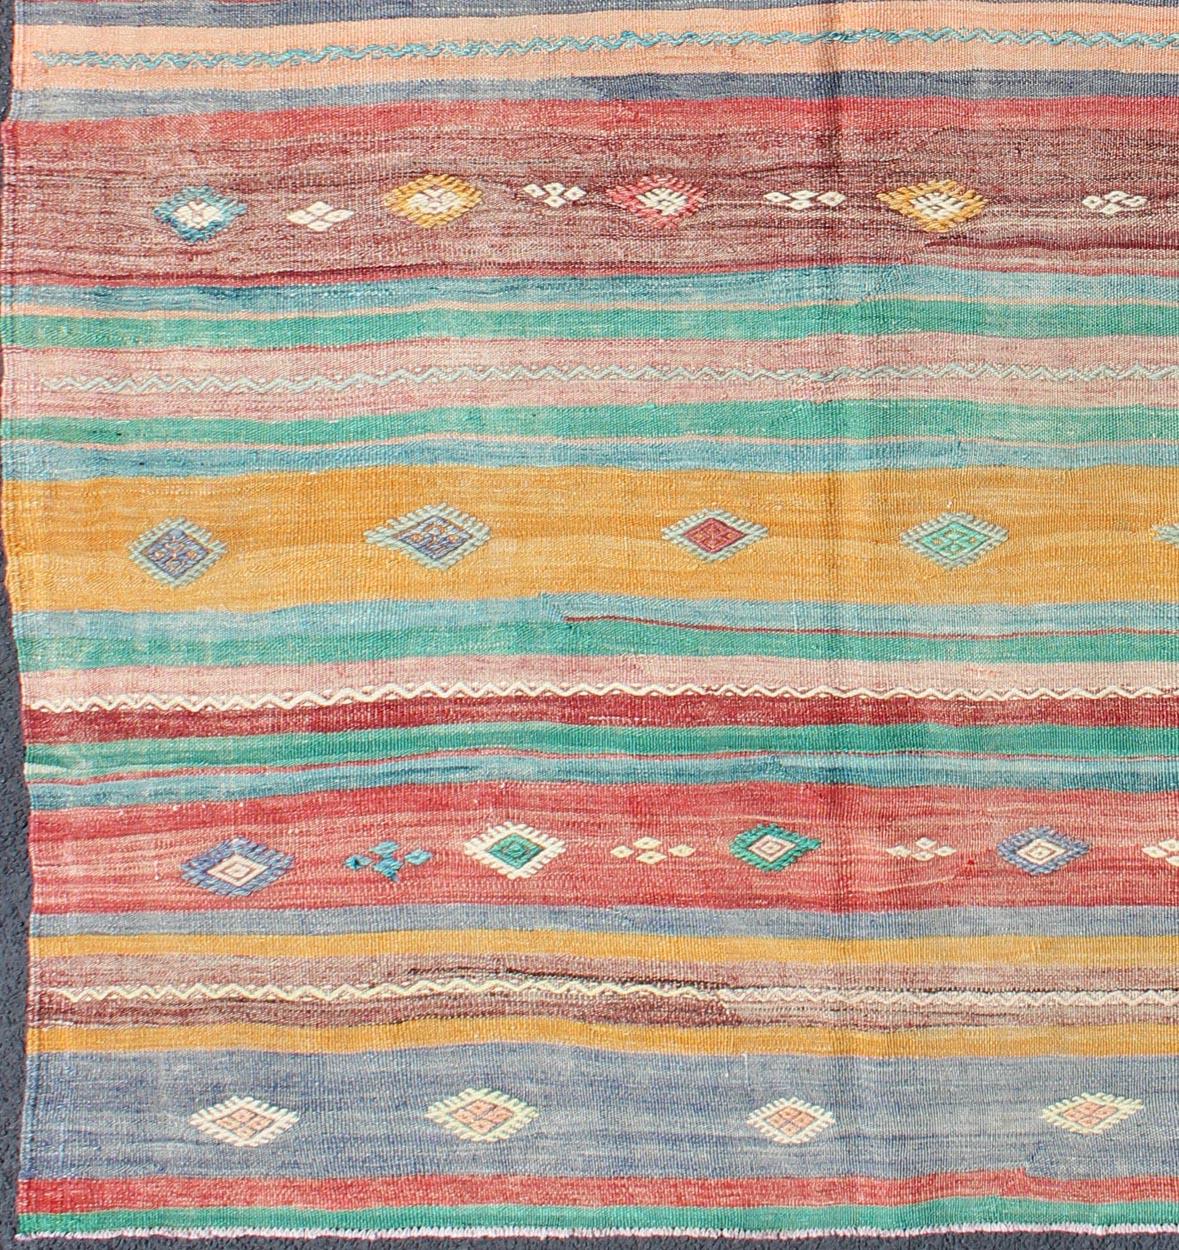 Featuring geometric tribal shapes rendered in a repeating horizontal stripe design, this unique midcentury Kilim showcases an array of bright and cheerful colors, including teal, blue, golden yellow, red, salmon pink, and ivory.

Measures: 5'4'' x